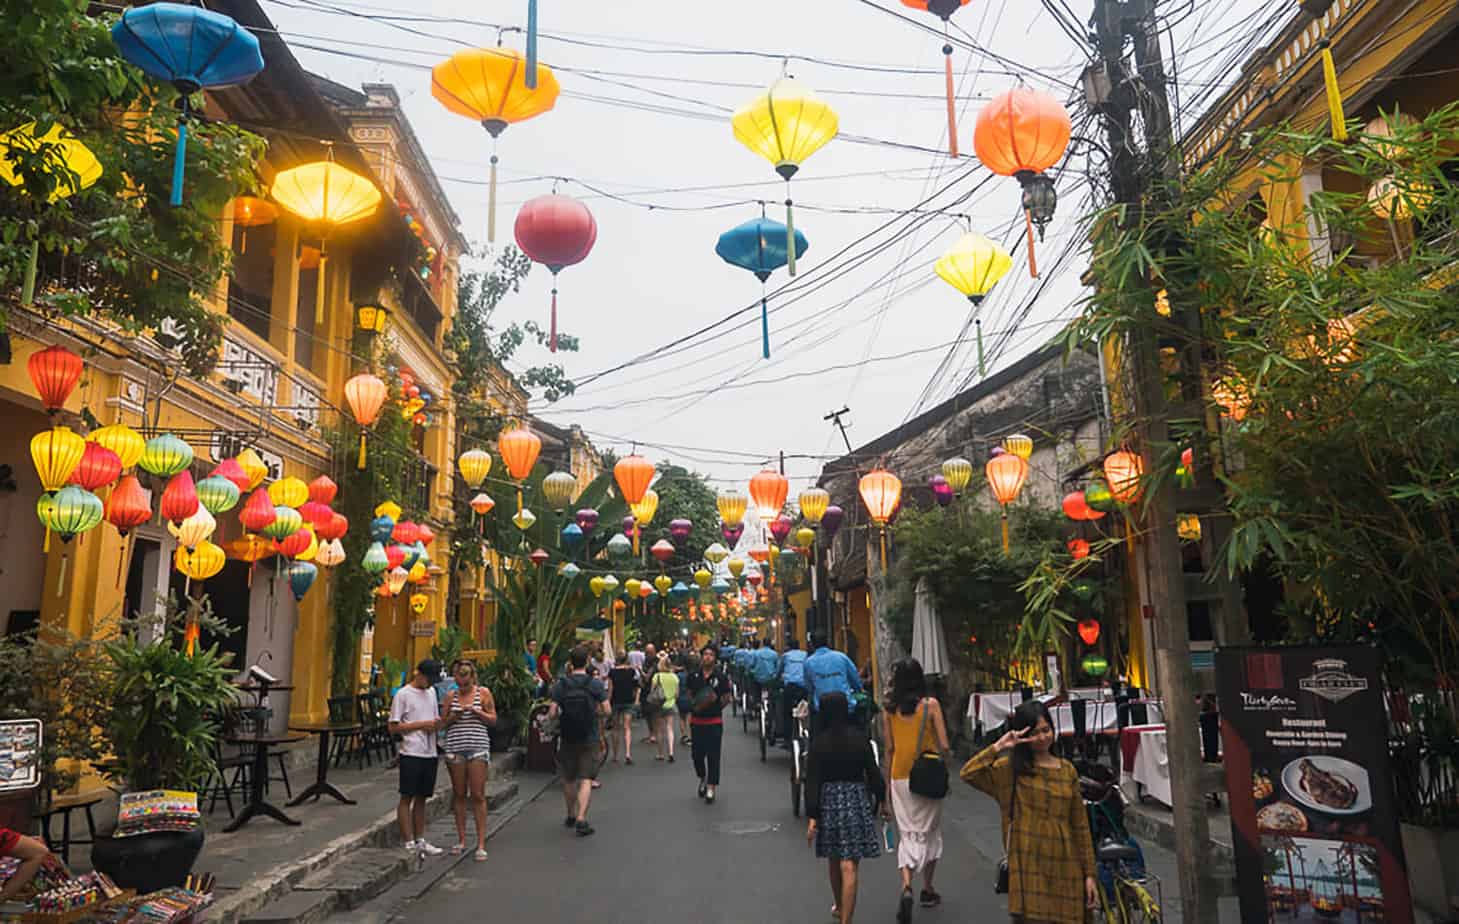 Walking around Hoi An ancient town is one of the best things to do in Hoi An